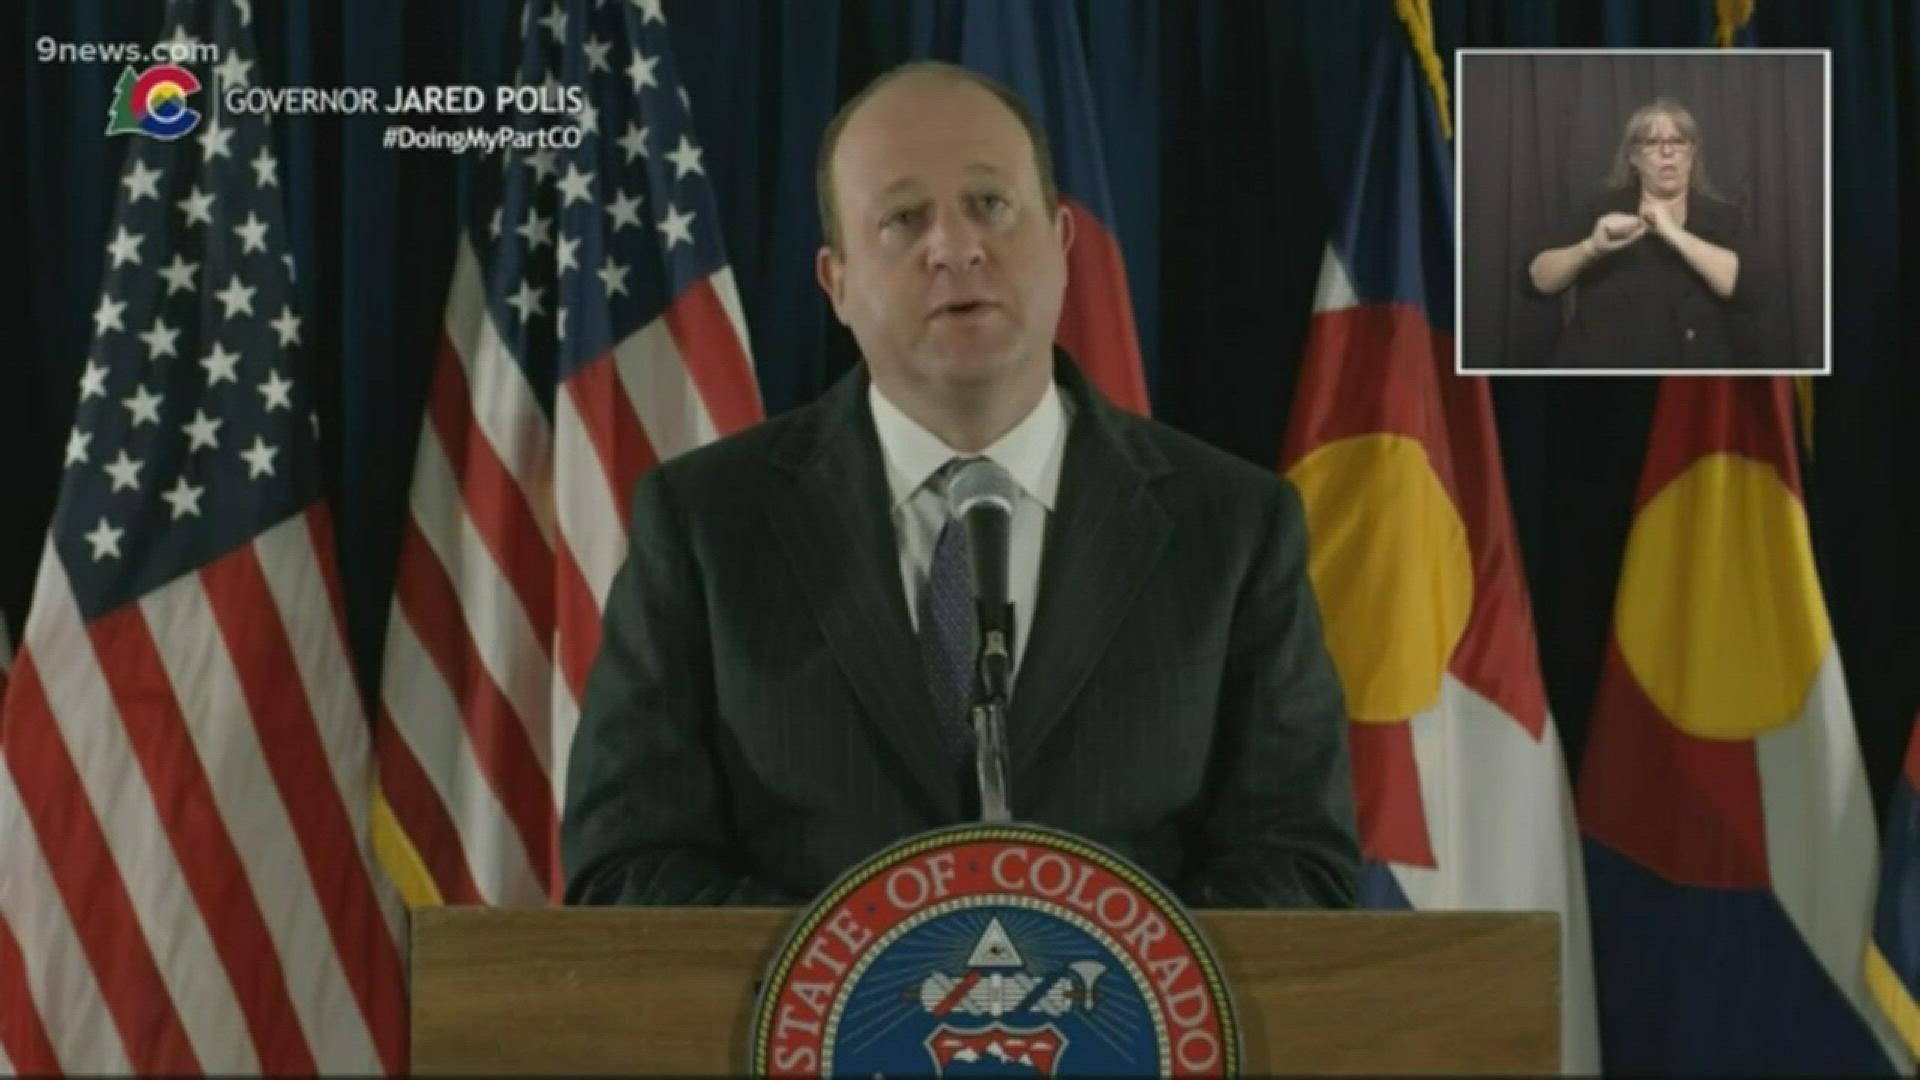 Watch Colorado Governor Jared Polis' full news conference from 6/4/20.